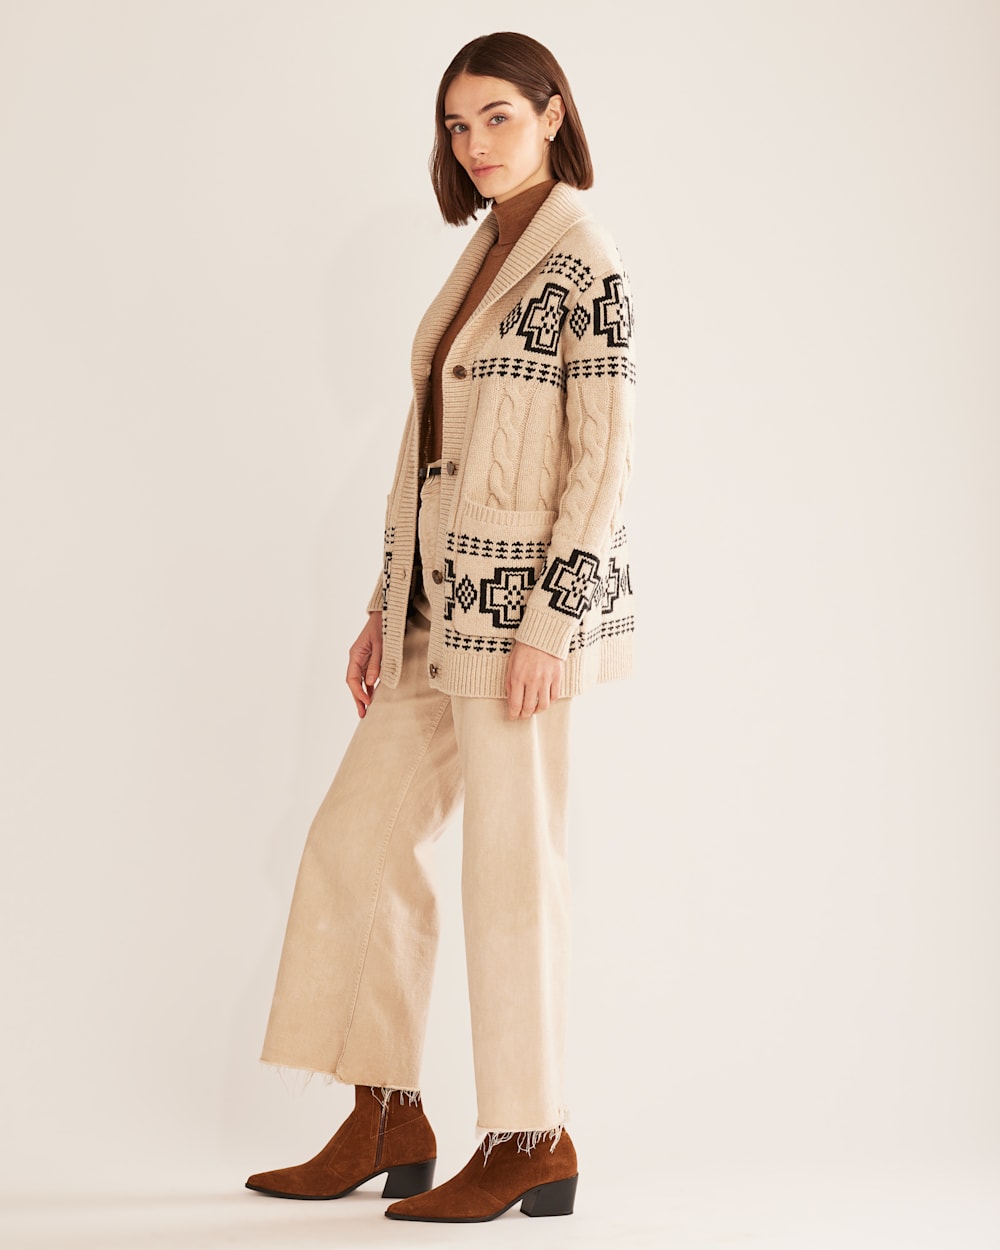 ALTERNATE VIEW OF WOMEN'S HARDING LAMBSWOOL CABLE CARDIGAN IN IVORY/BLACK image number 2